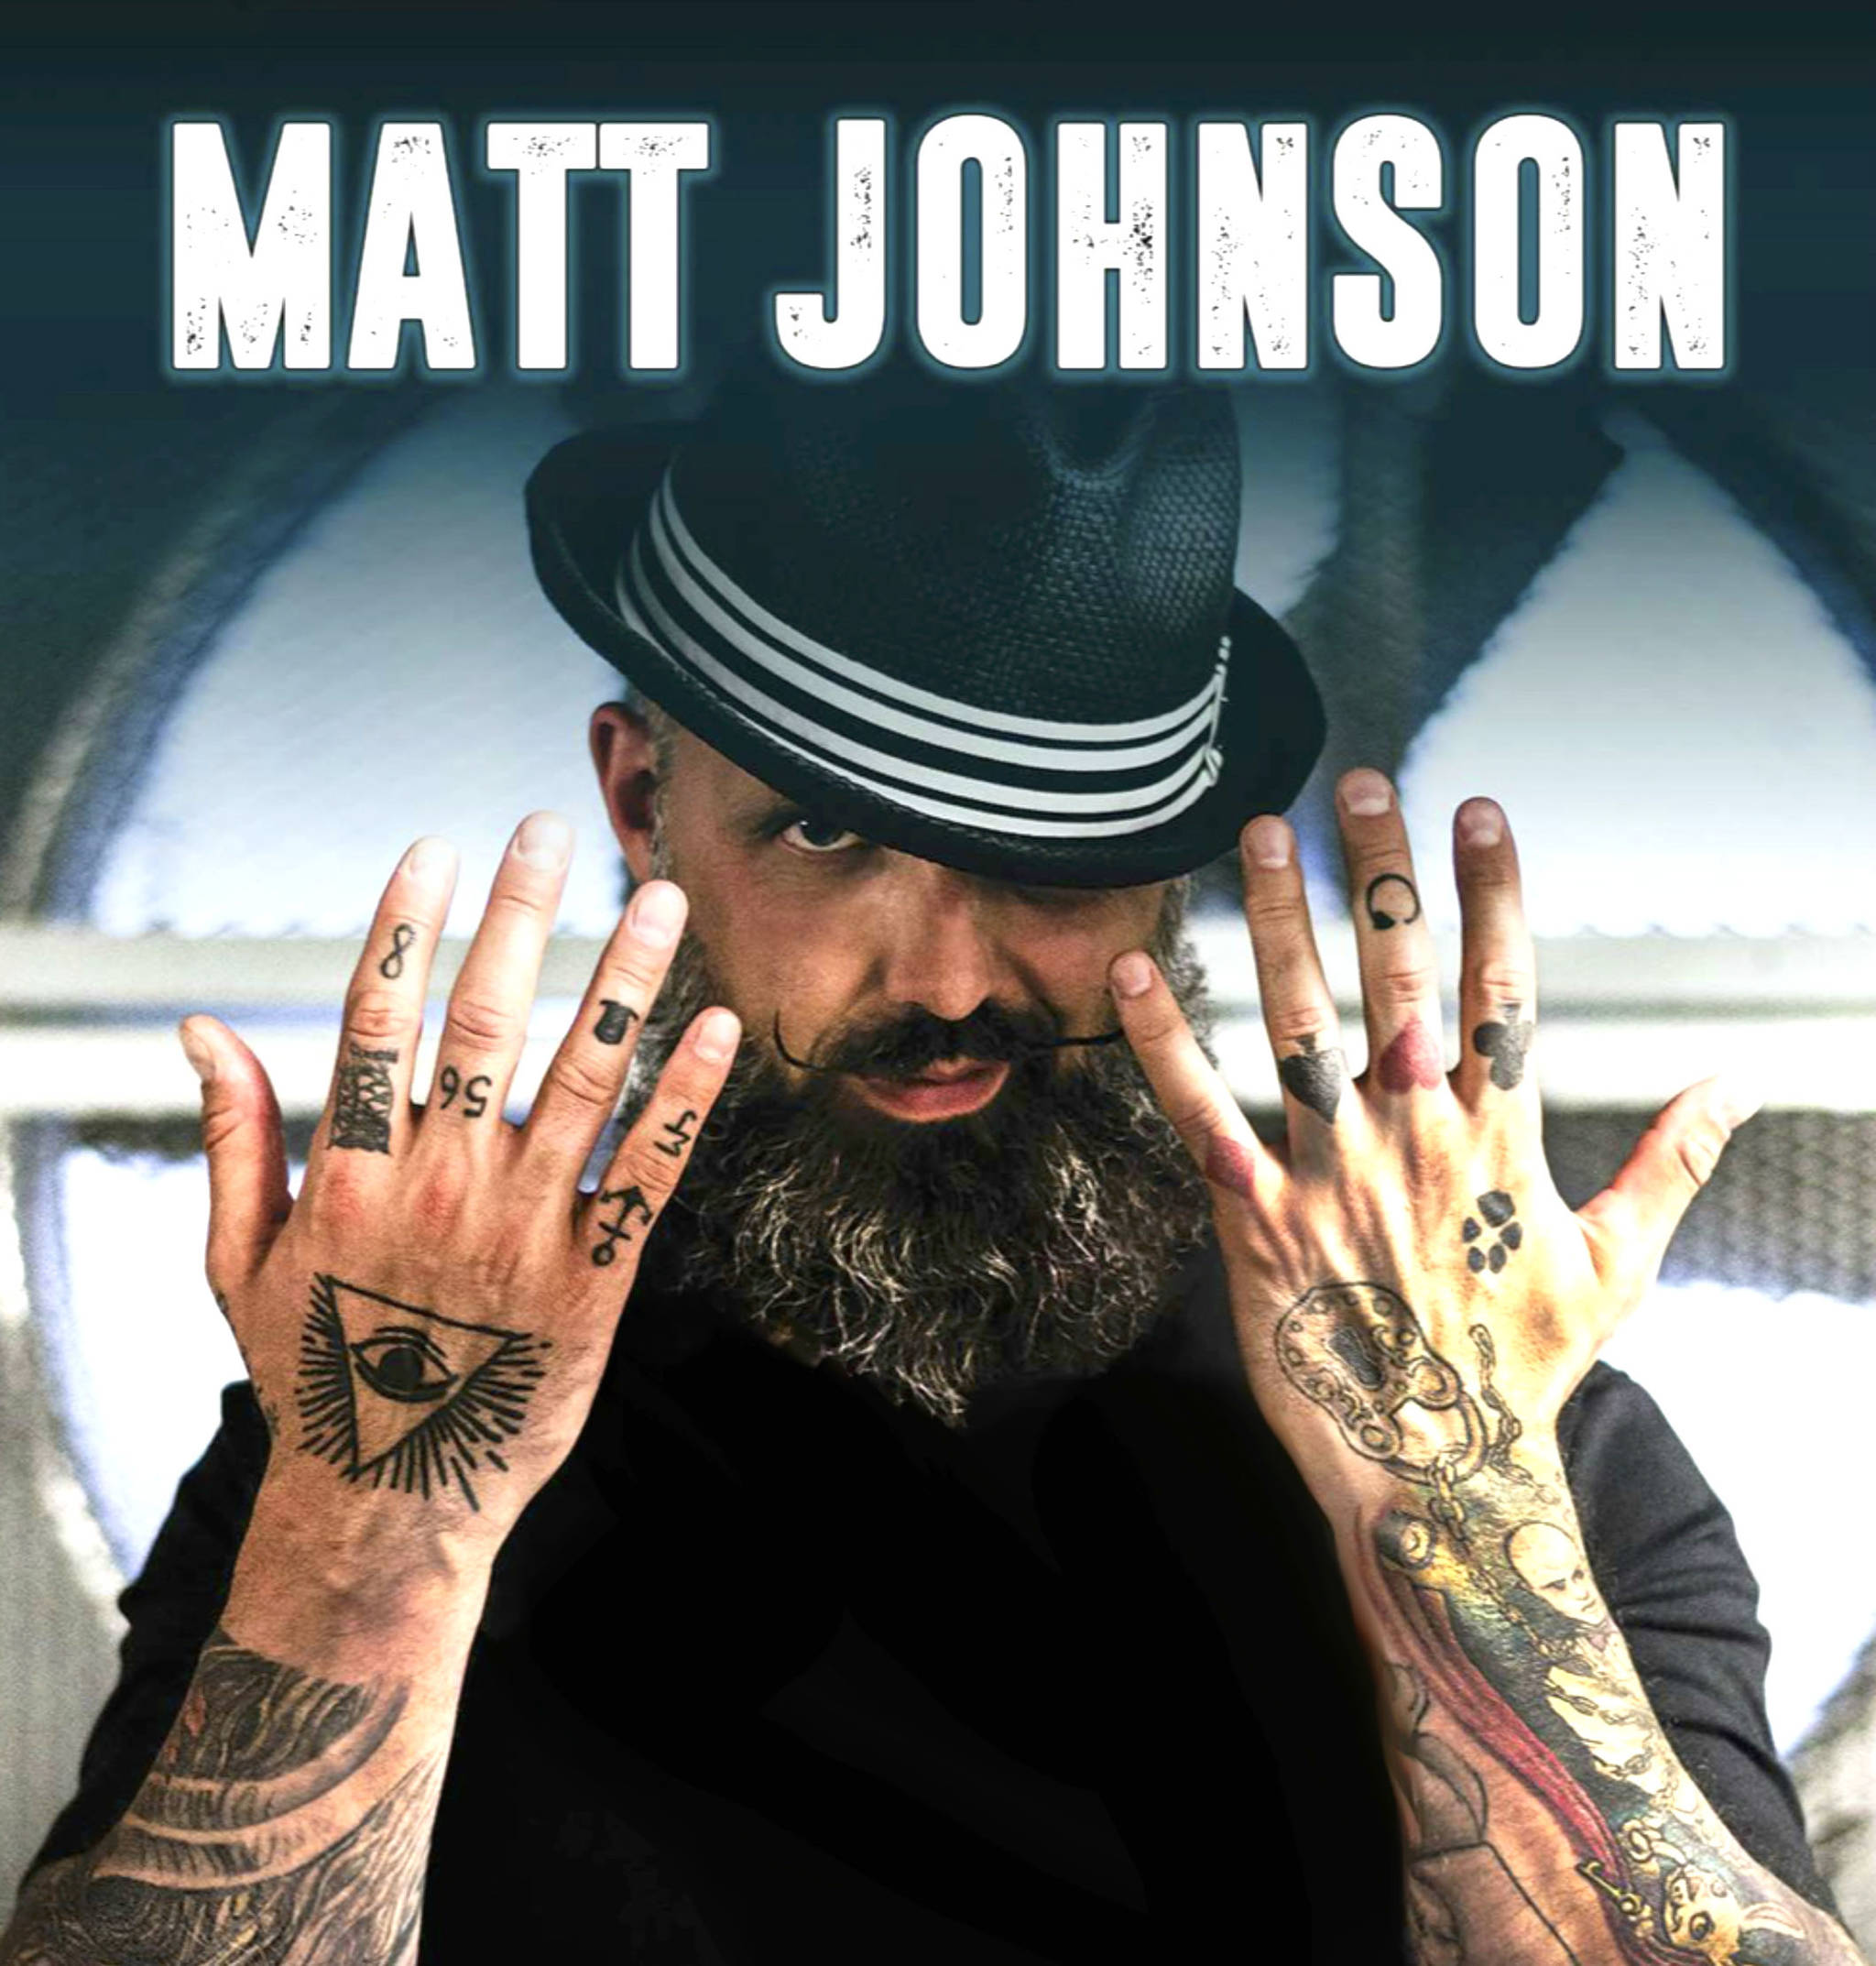 Matt Johnson - a world-renowned illusionist, mentalist, escapologist and magician - is performing in Stettler Jan. 13. Contributed photo